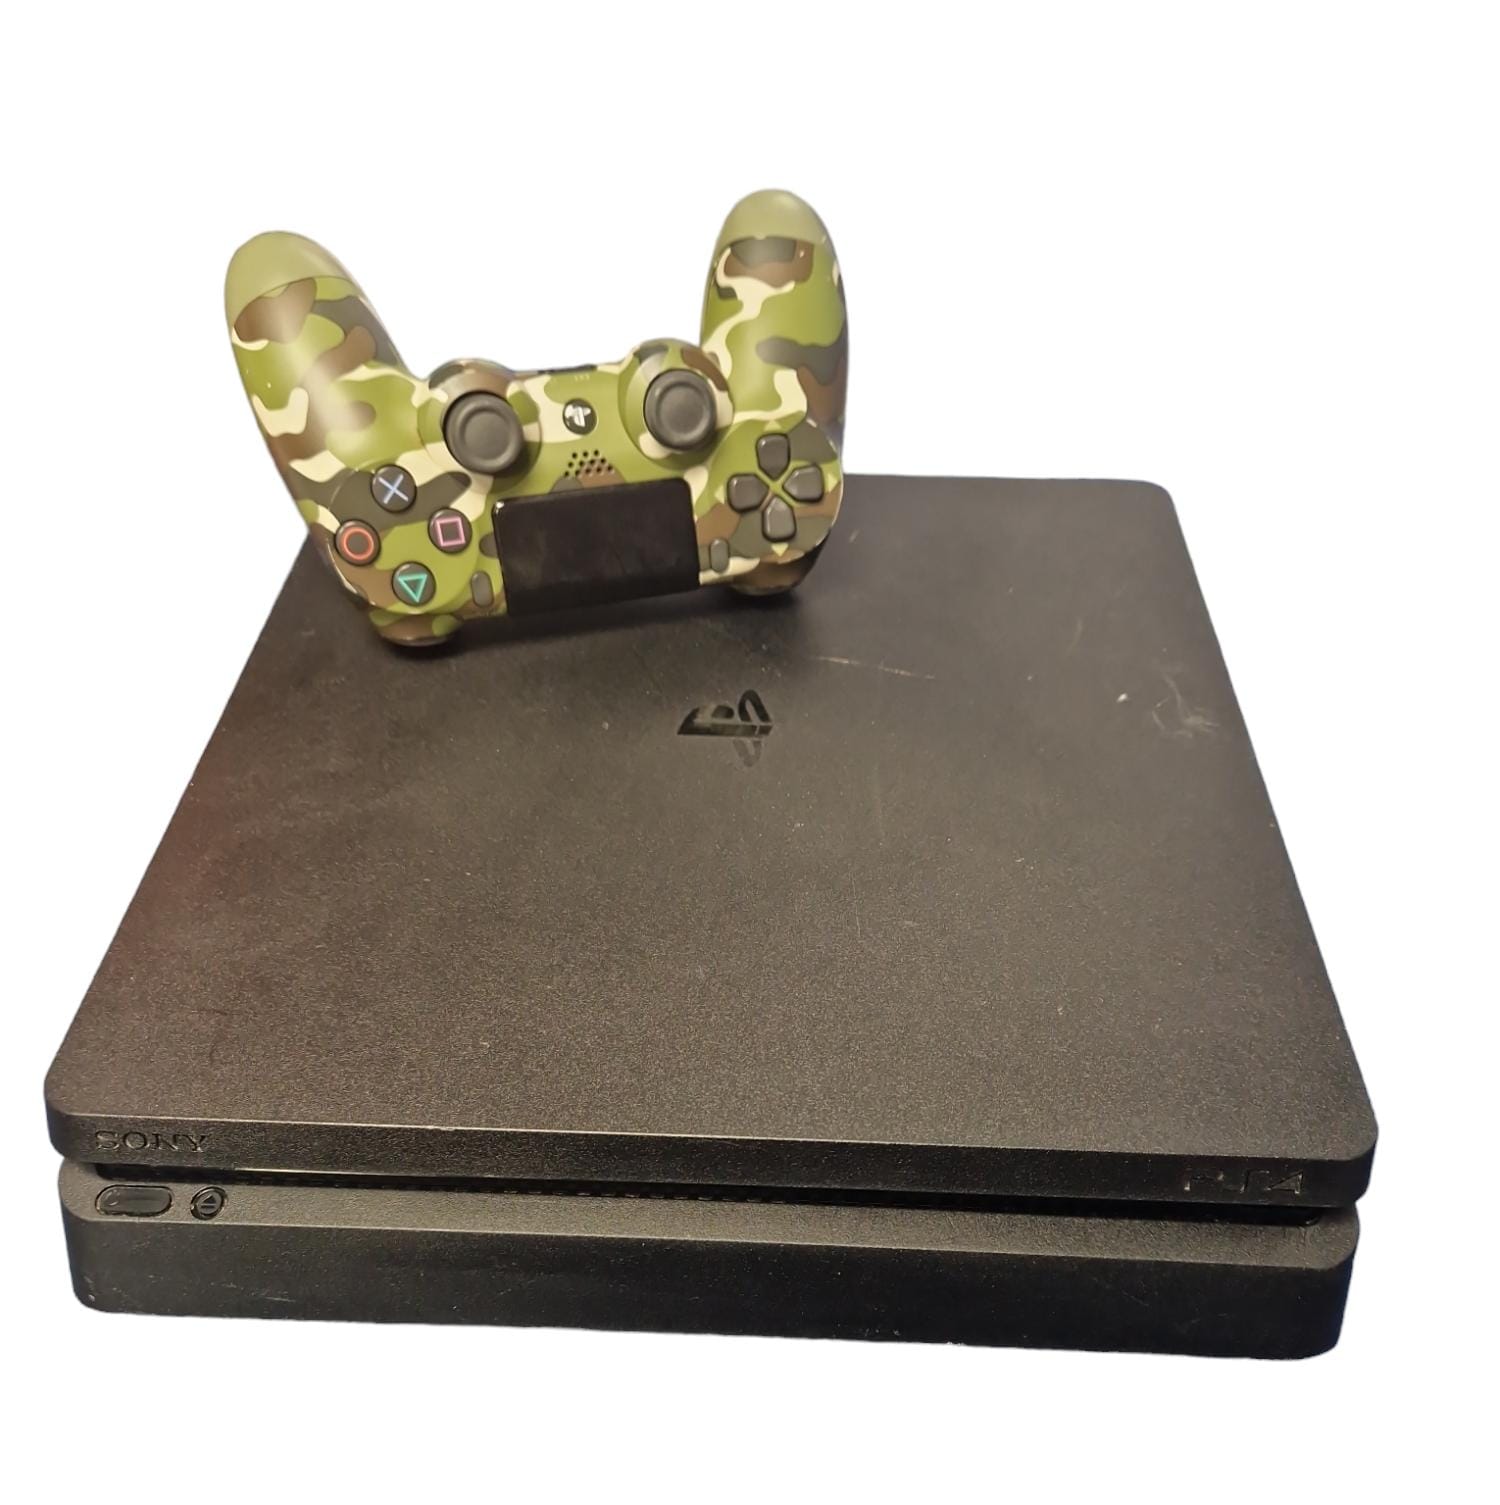 Playstation 4 Slim, with Green camo controller 